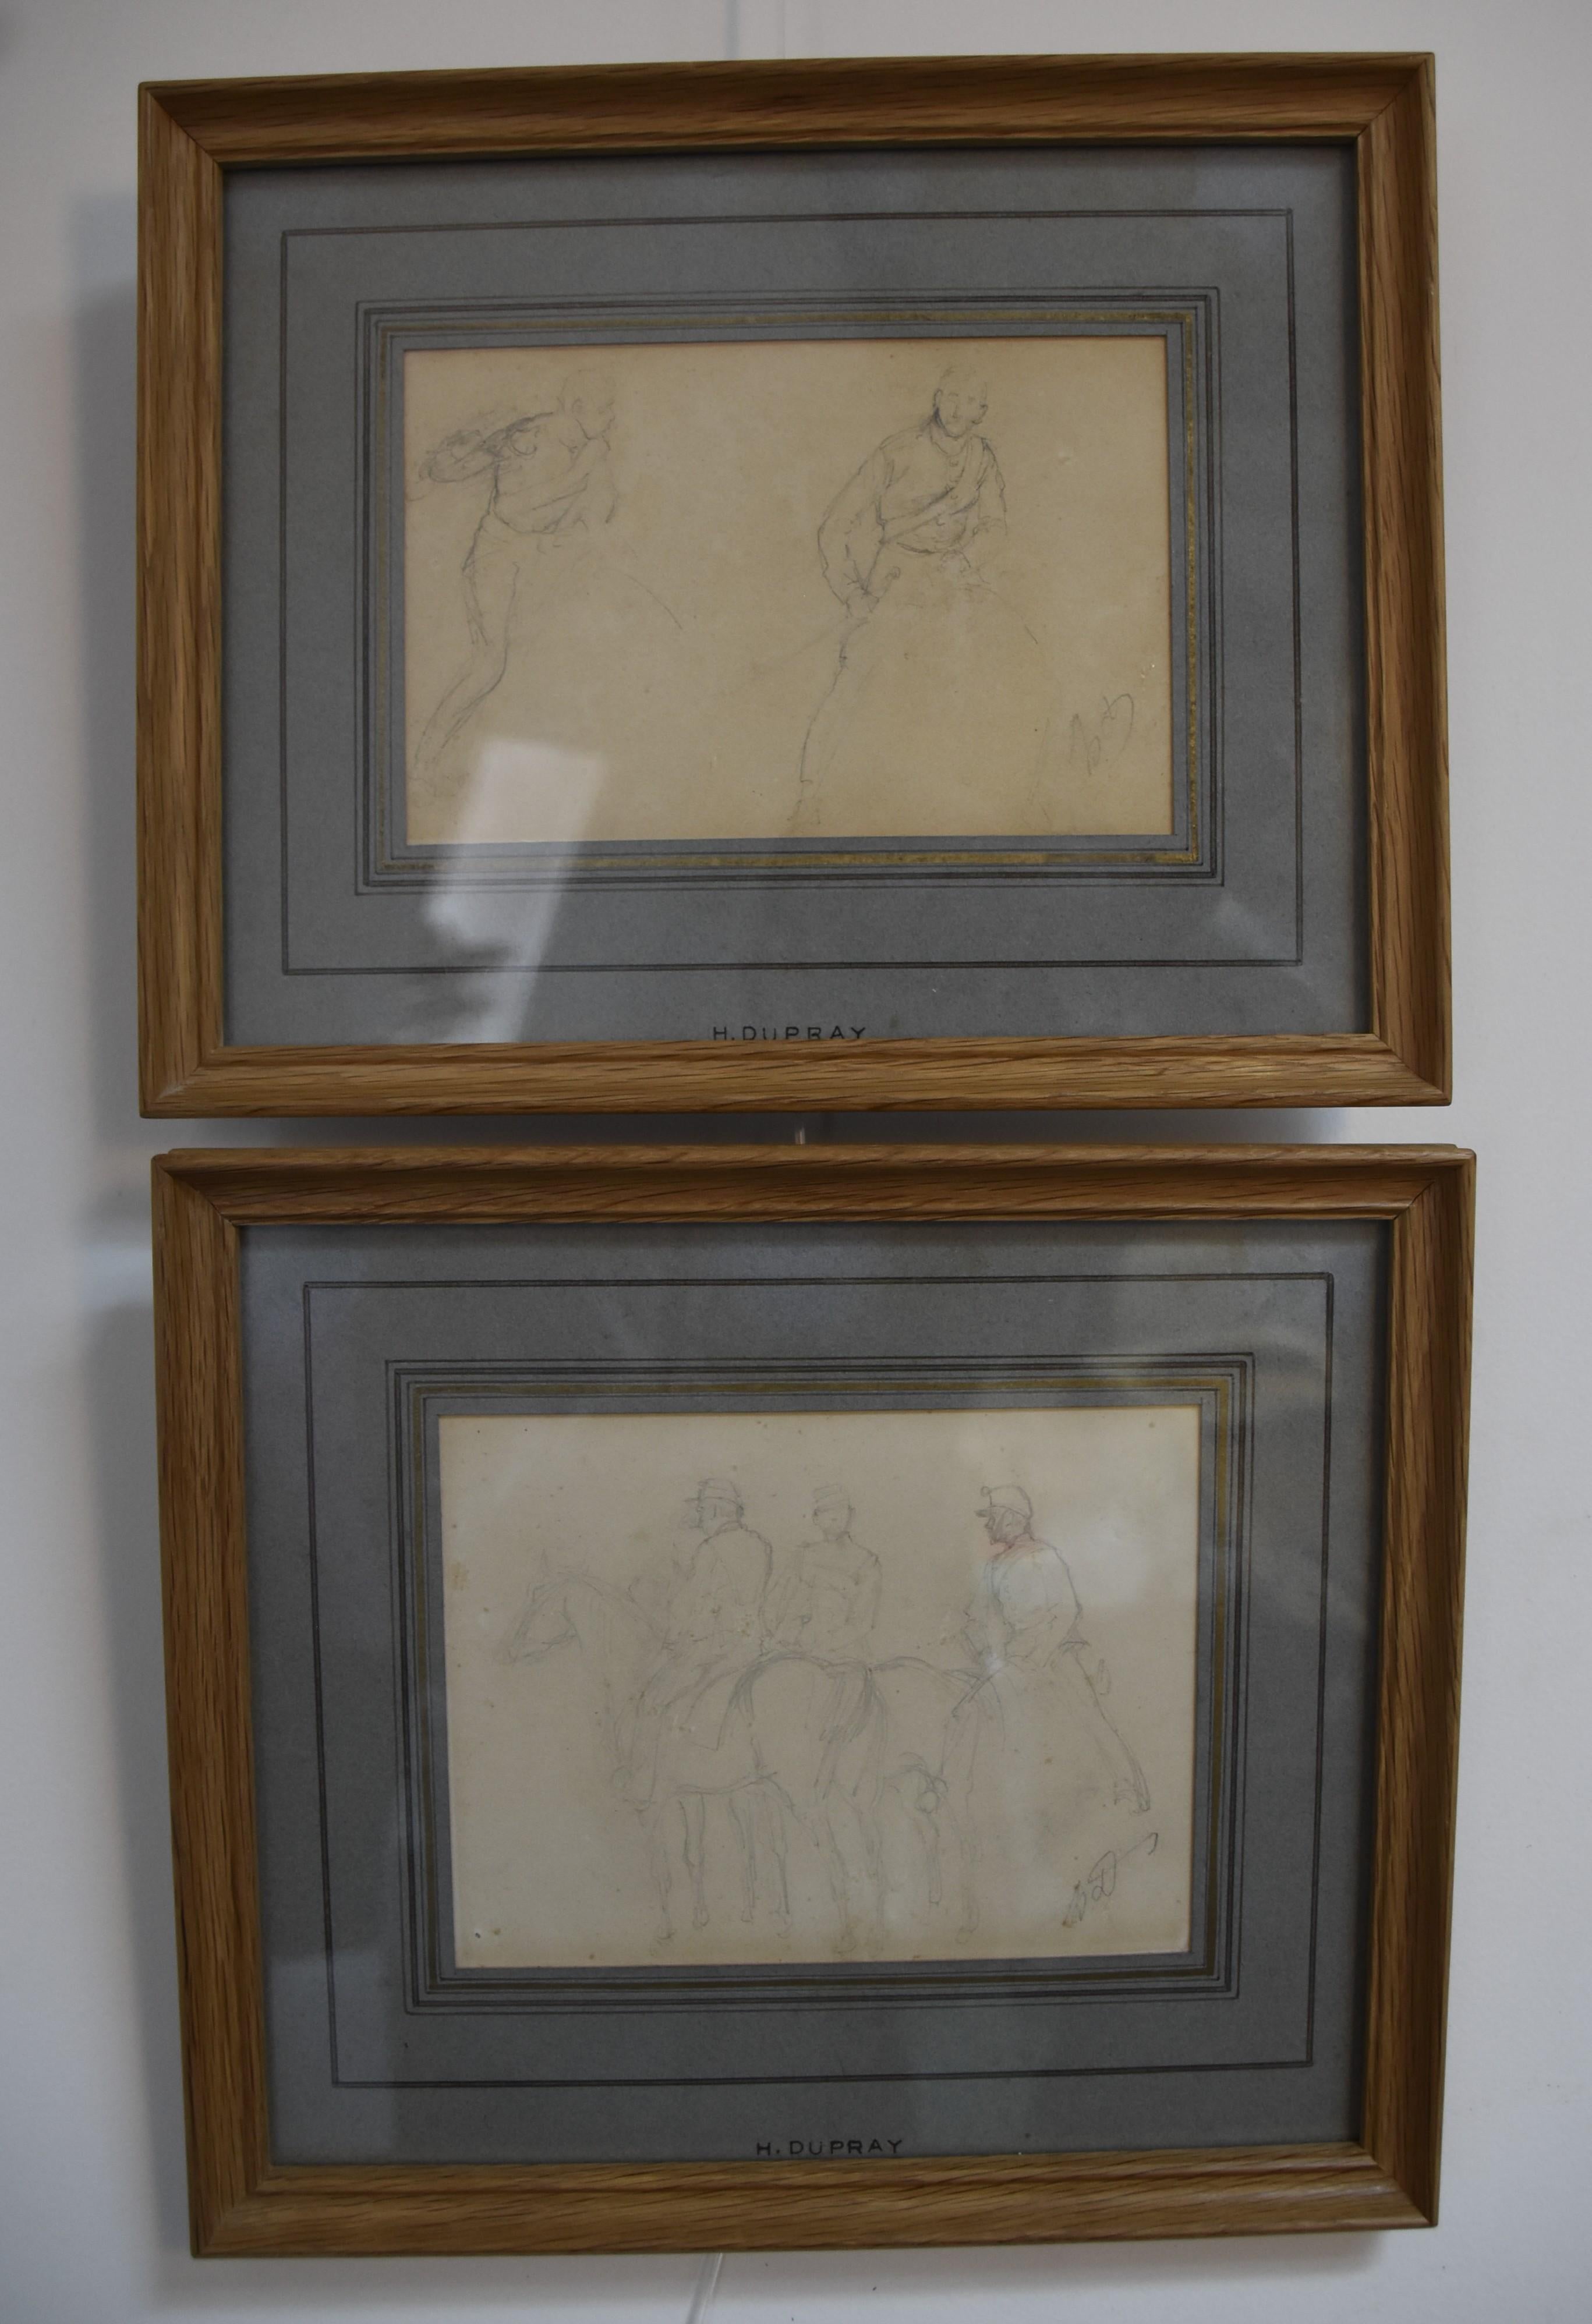 Henri-Louis Dupray (1841-1909) 
Studies of military horsemen, two signed drawings
Pencil on paper
The first one figuring a partial study of two horsemen : 
10.8 x 16.5 cm, bears a monogramm signature lower right, in quite good condition, yellowed by